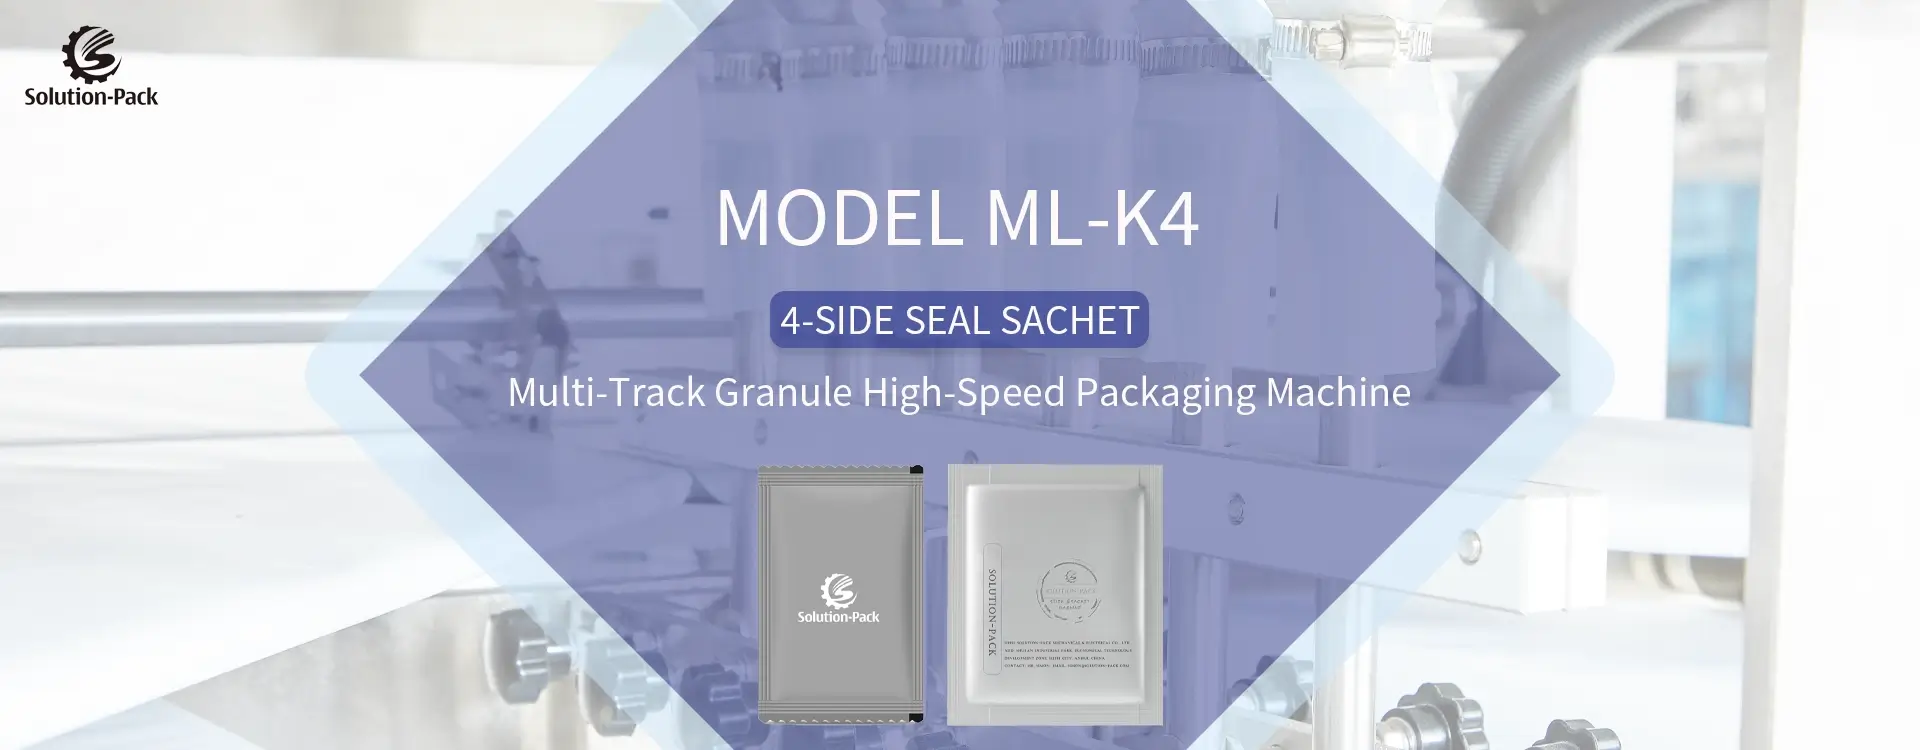 Model ML-K4 Automatic High-Speed Multi-Track Granule 4-Side Seal Sachet Packaging Machine Unit Heading Banner Picture | Solution-Pack